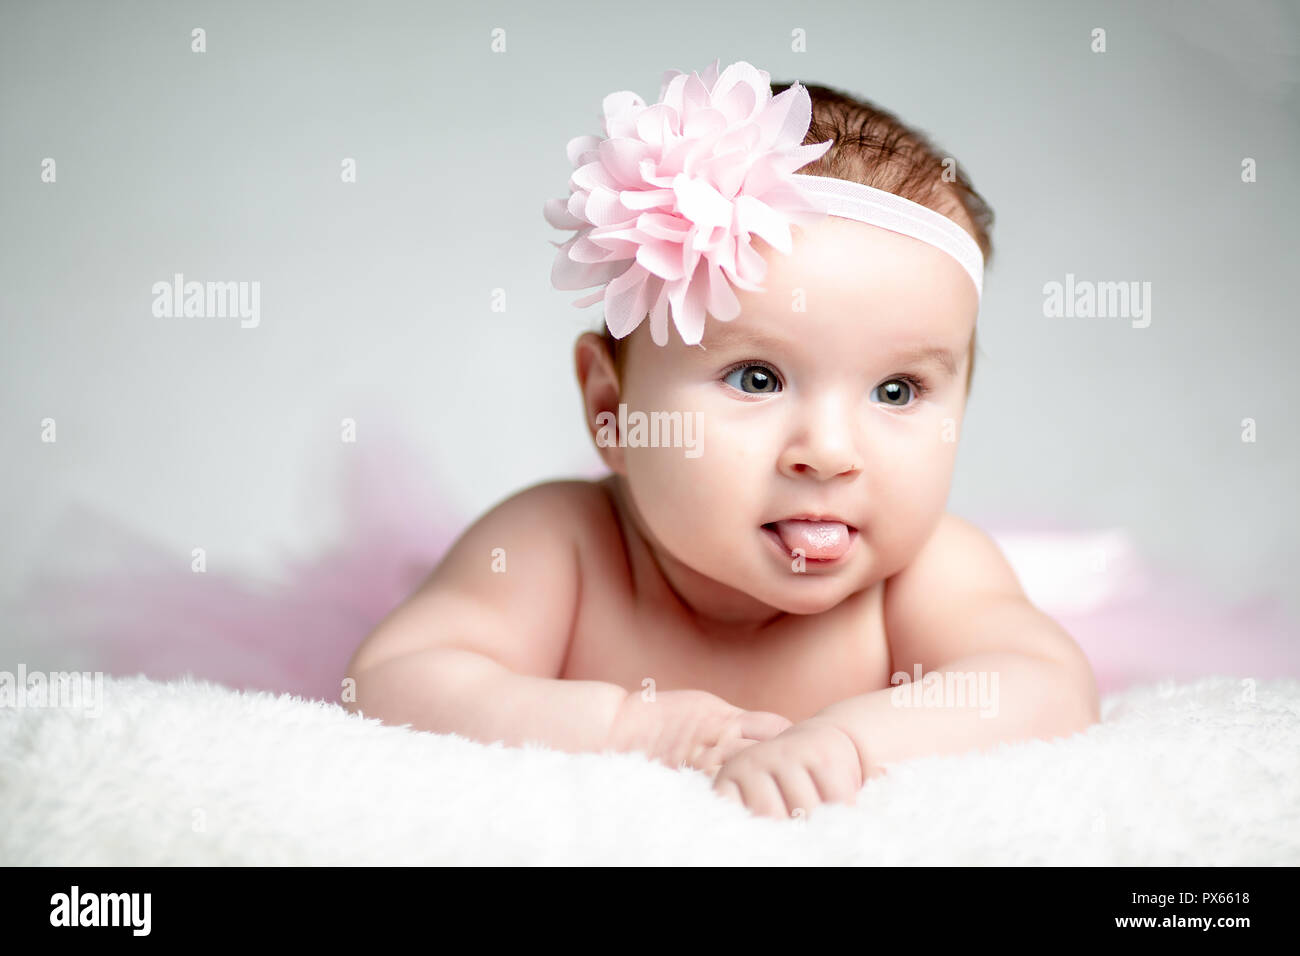 Adorable little baby girl crawling on the floor wearing tutu skirt Stock Photo